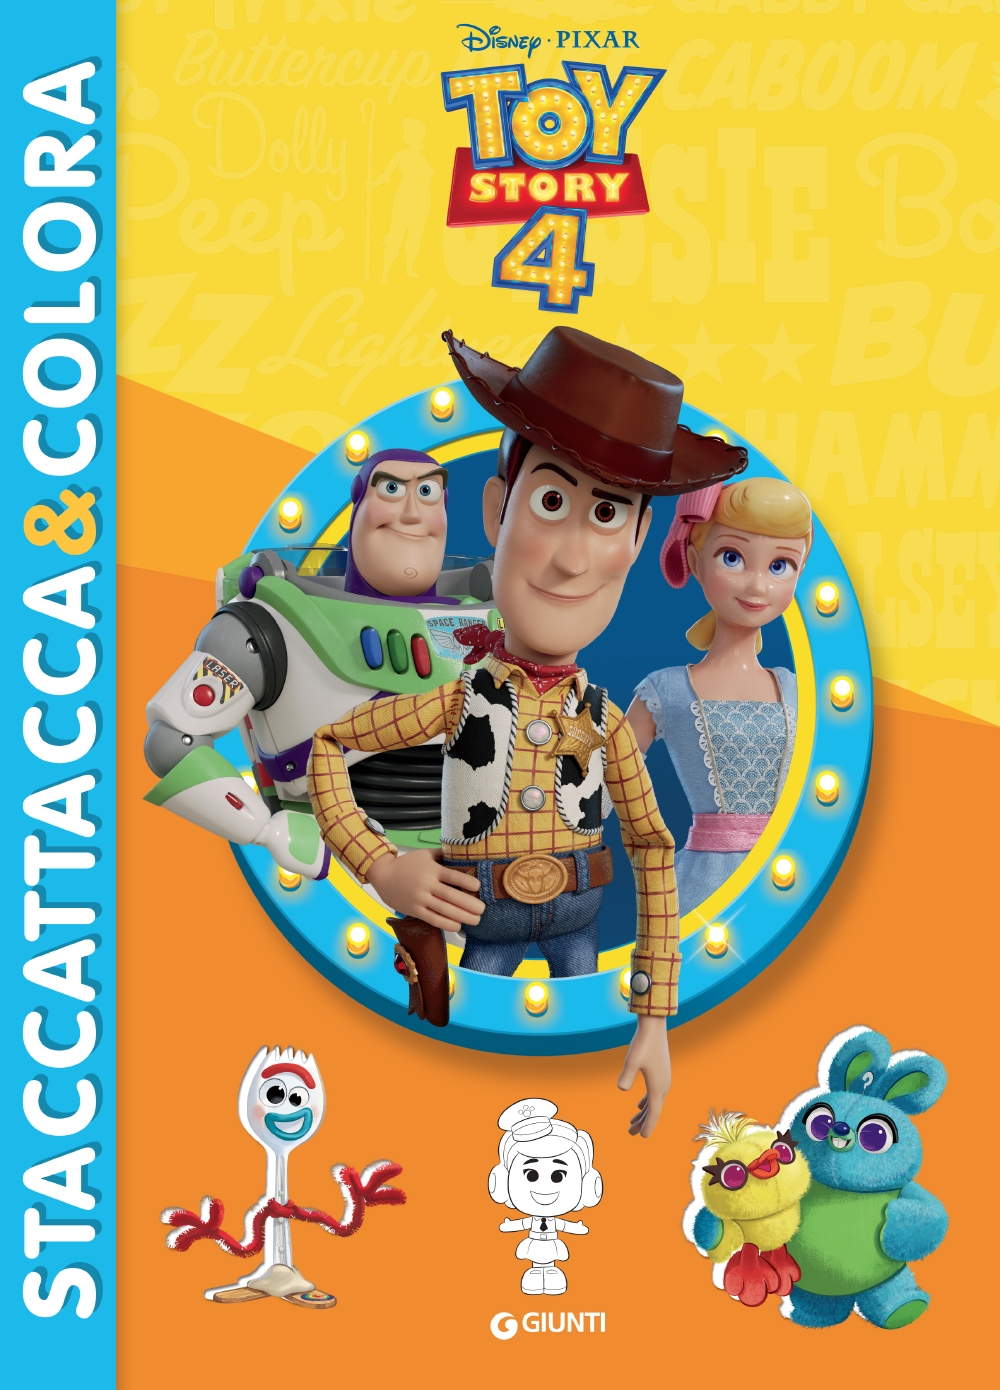 Toy Story 4 - Staccattacca&Colora